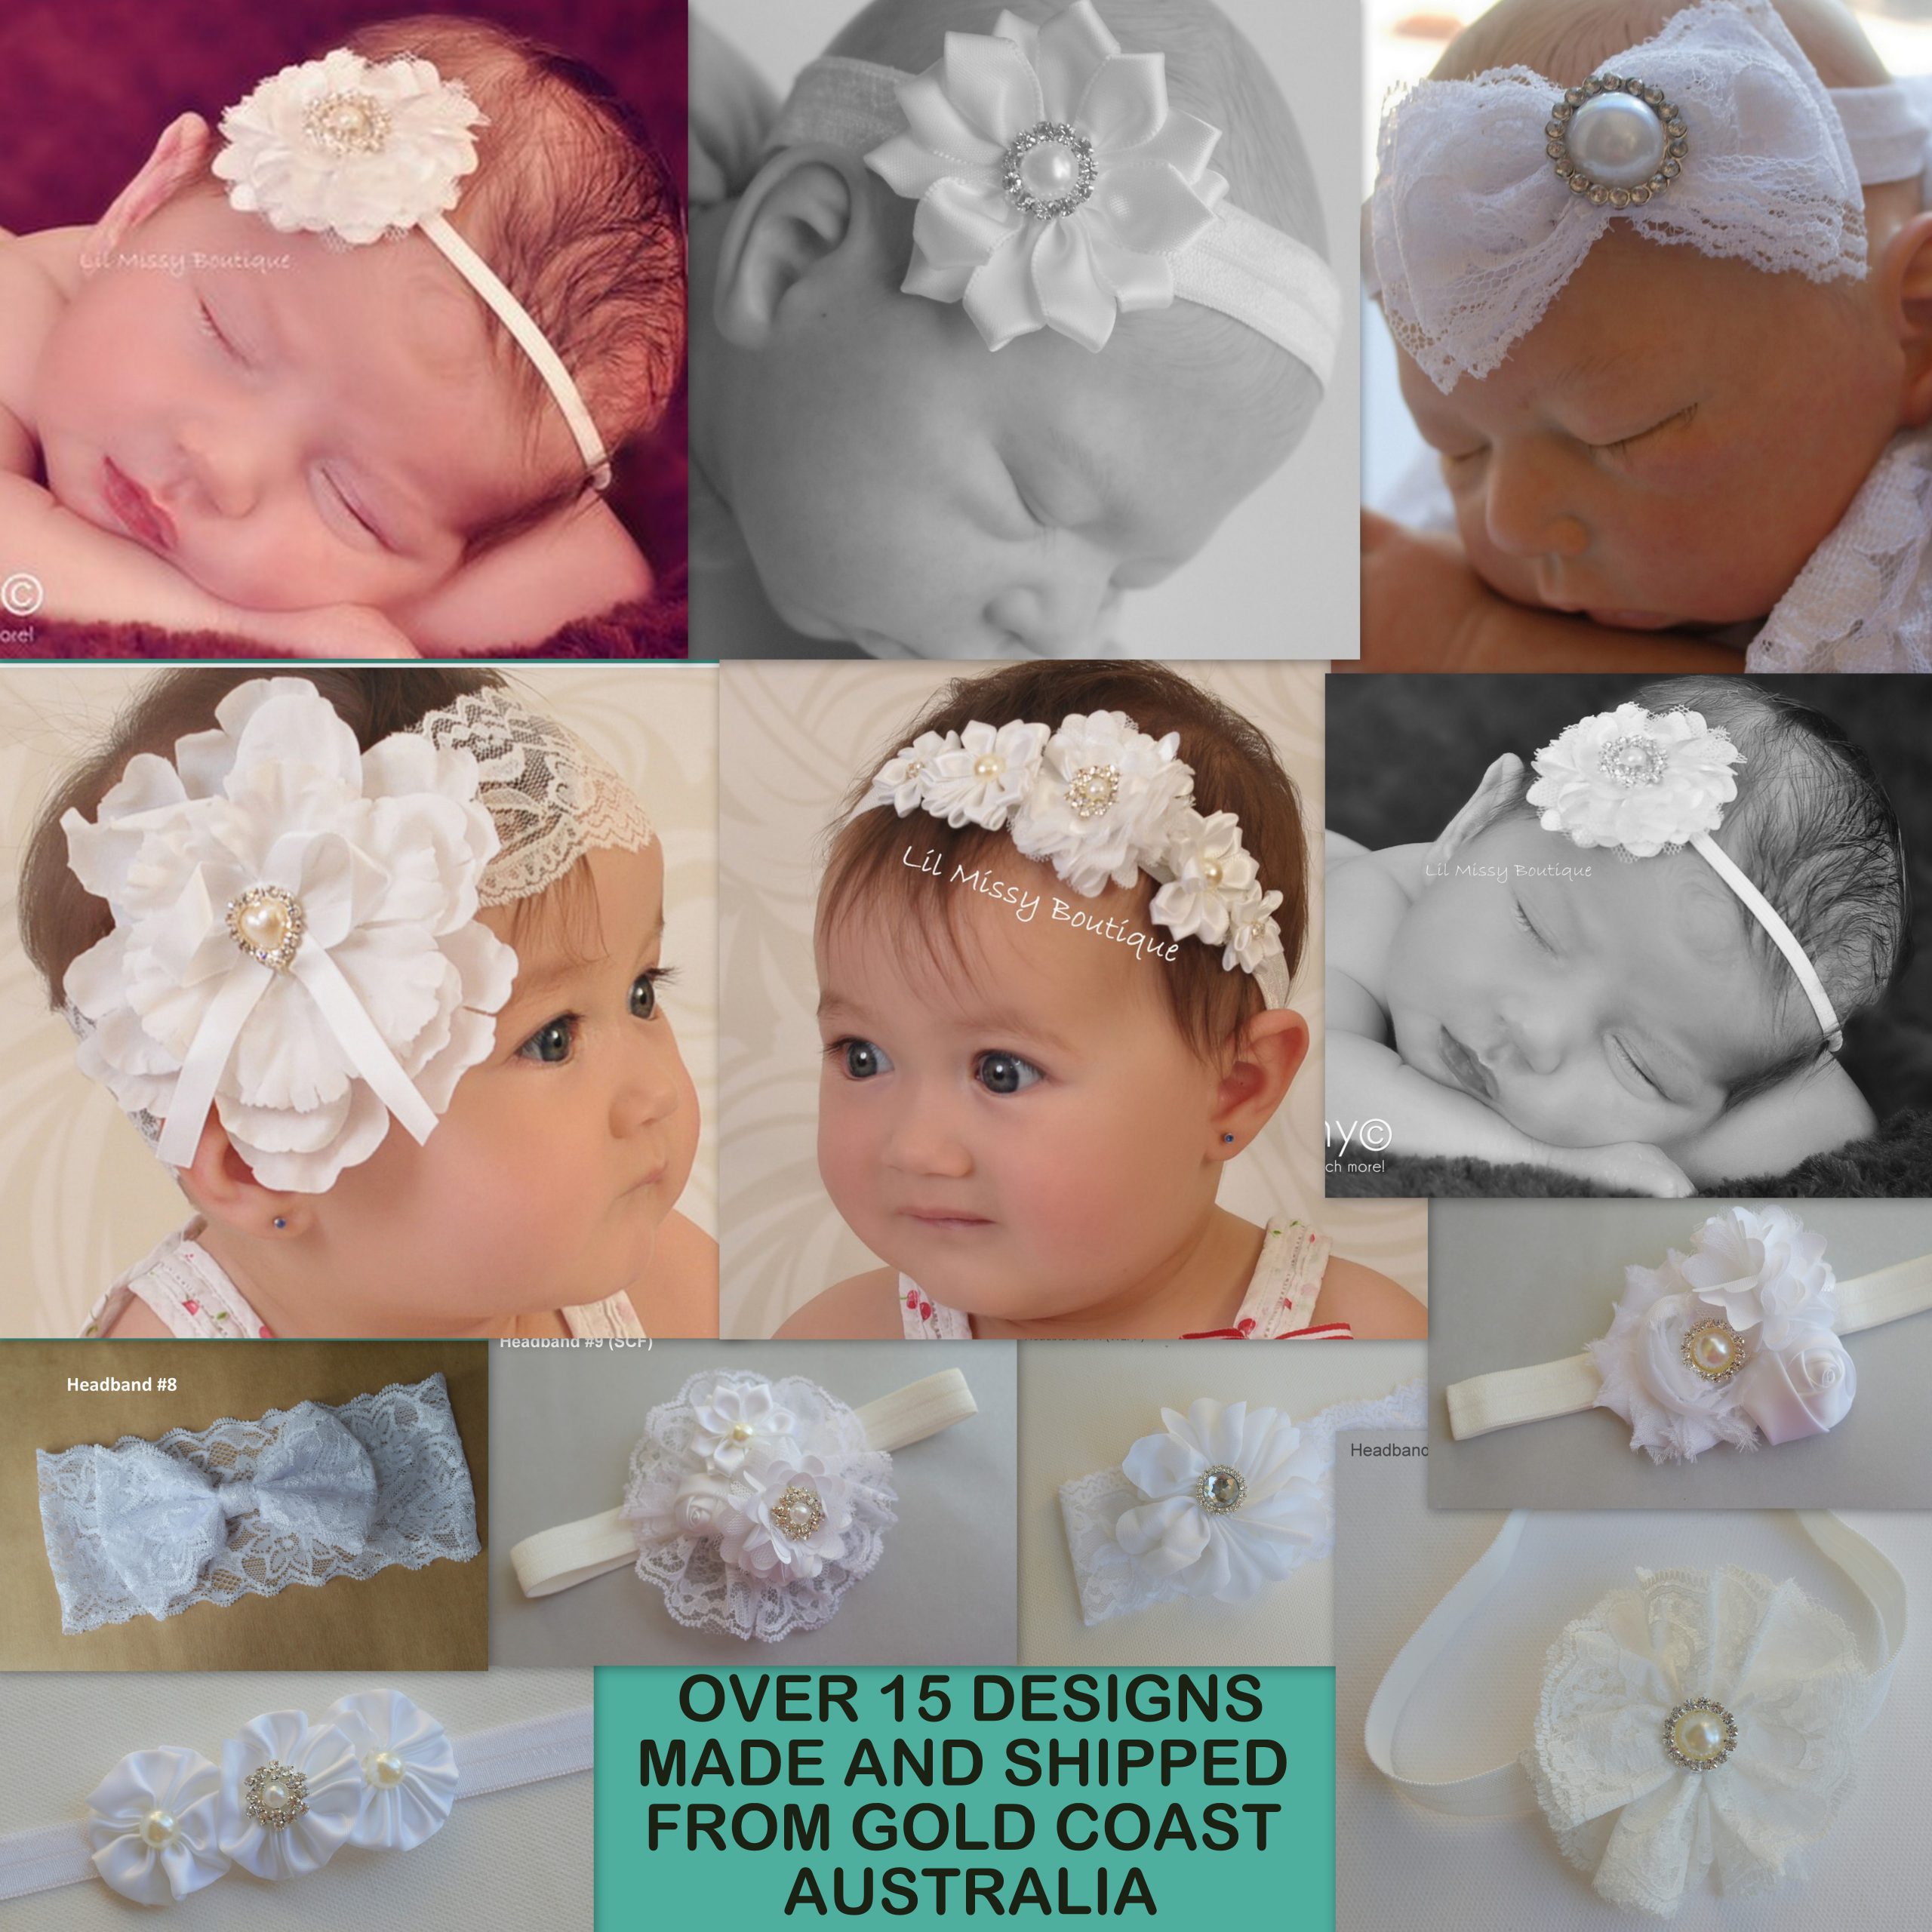 Satin Roses Shabby Flower Christening Shoes Baby Shower Gift Cluster of Pearls Lace Headband Girl White Baptism Shoes Daisy Flower